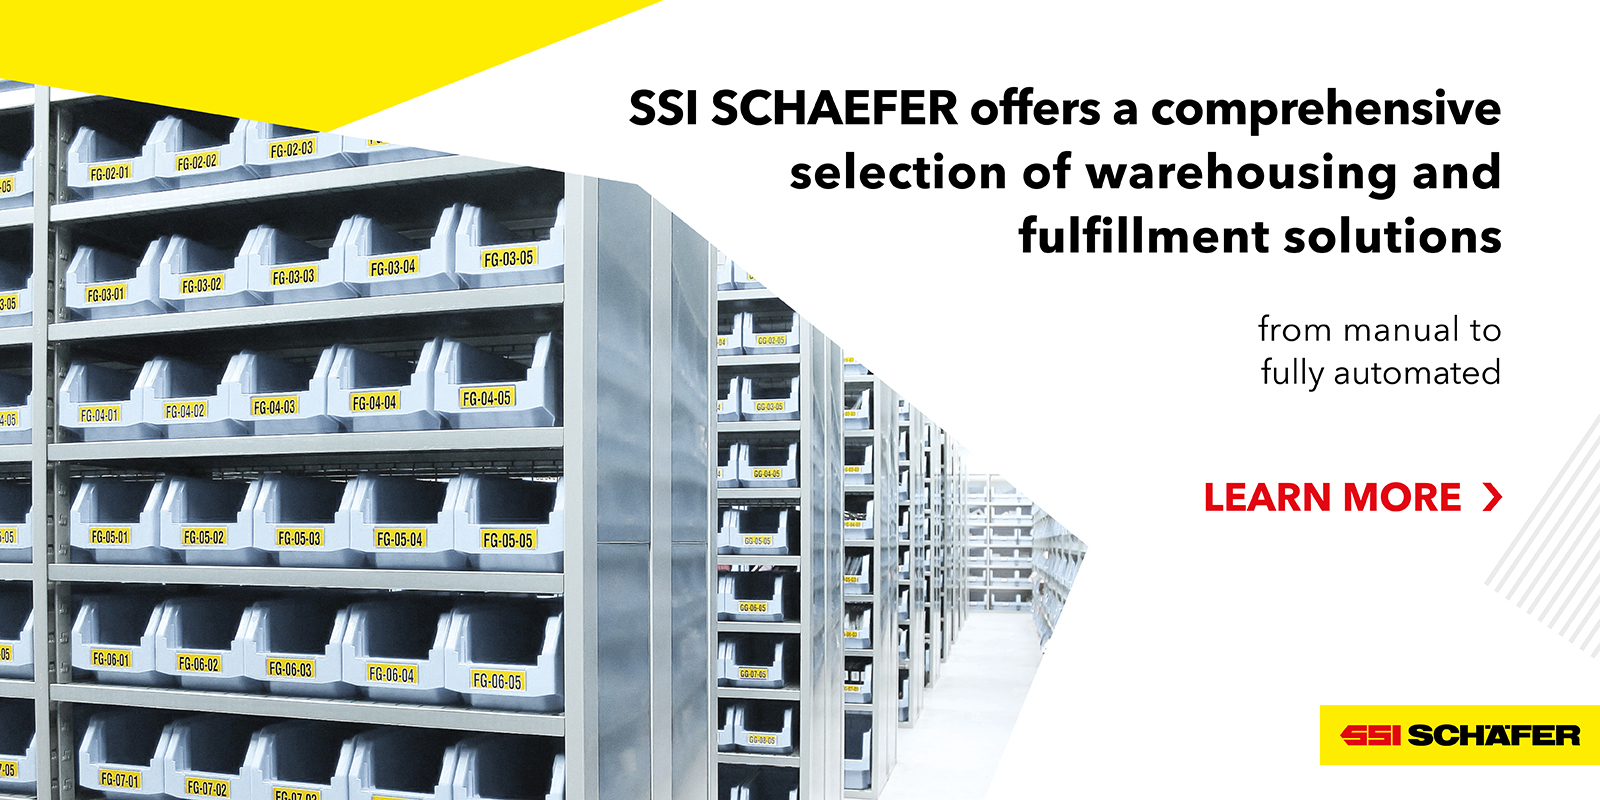 SSI SCHAEFER offers a comprehensive selection of warehousing and fulfillment solutions